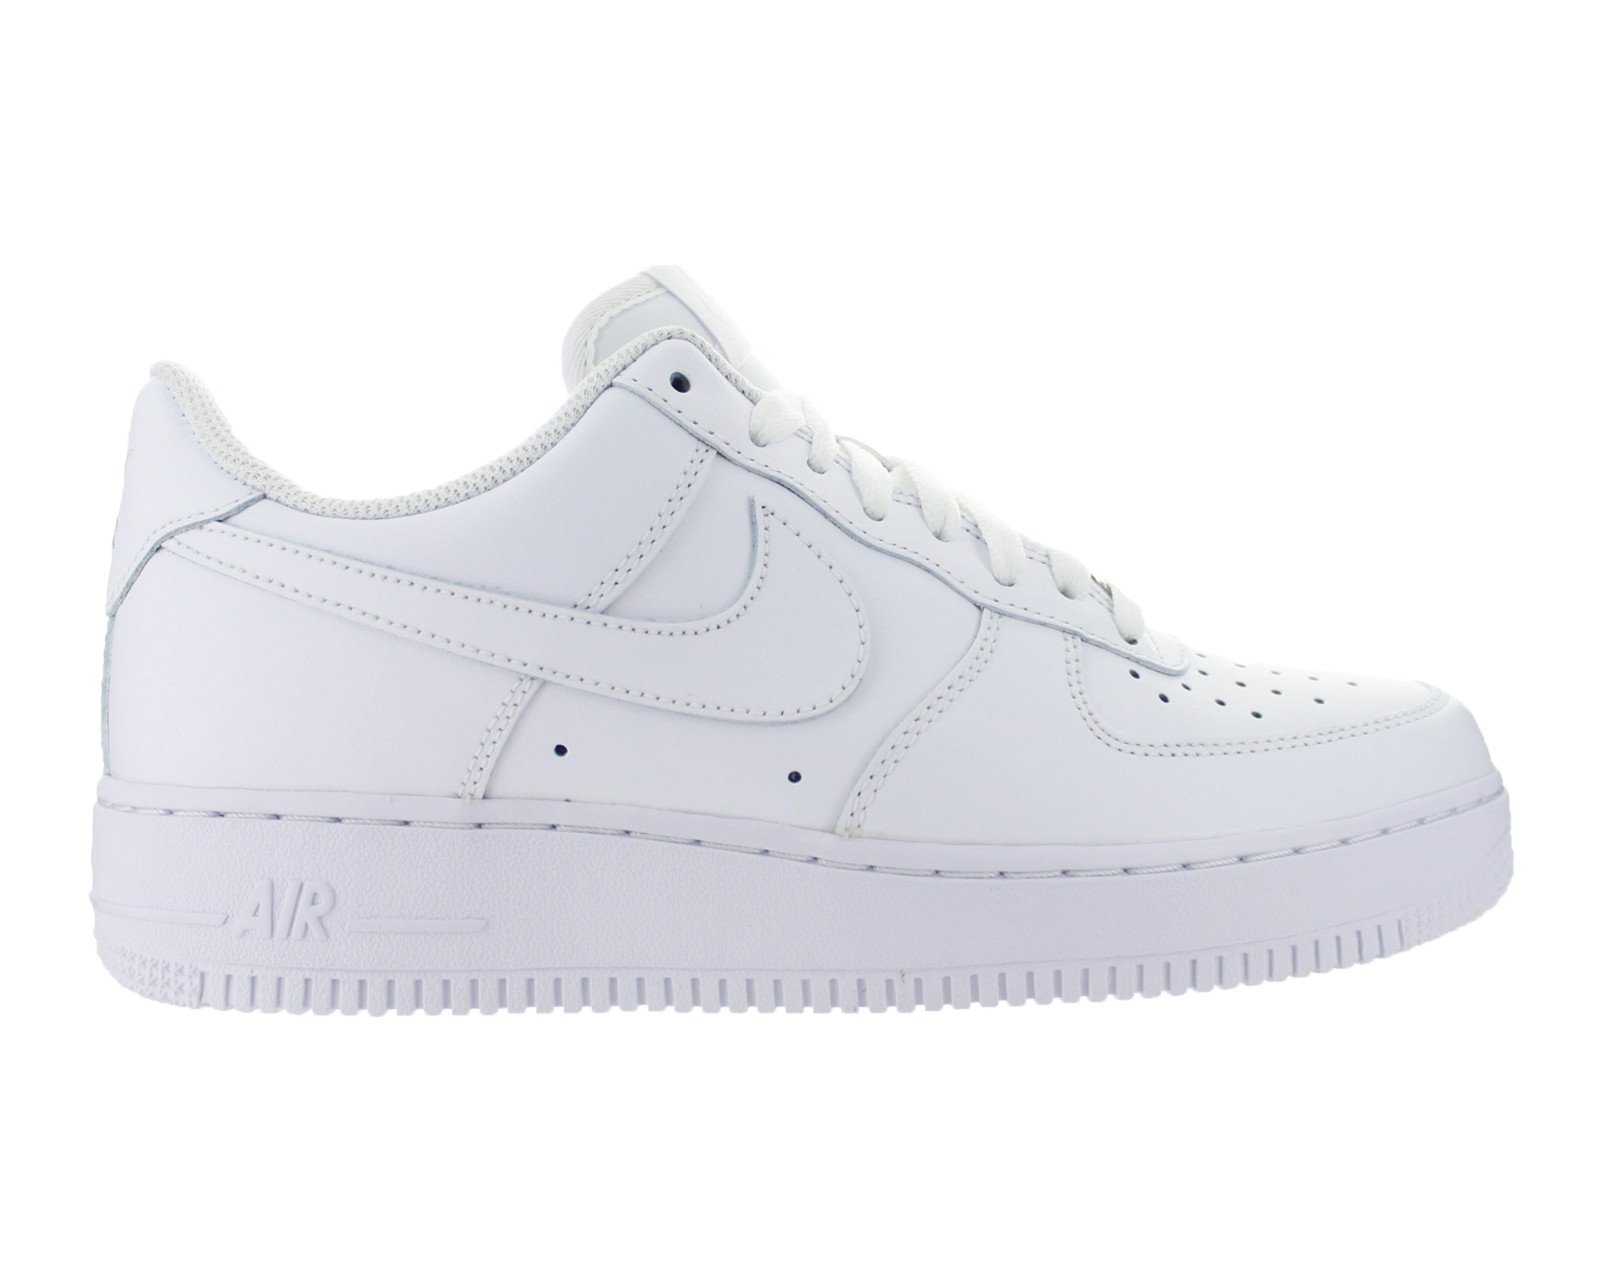 Nike Mens Air Force 1 Low White/White Leather Casual Shoes 6 M US - image 1 of 3